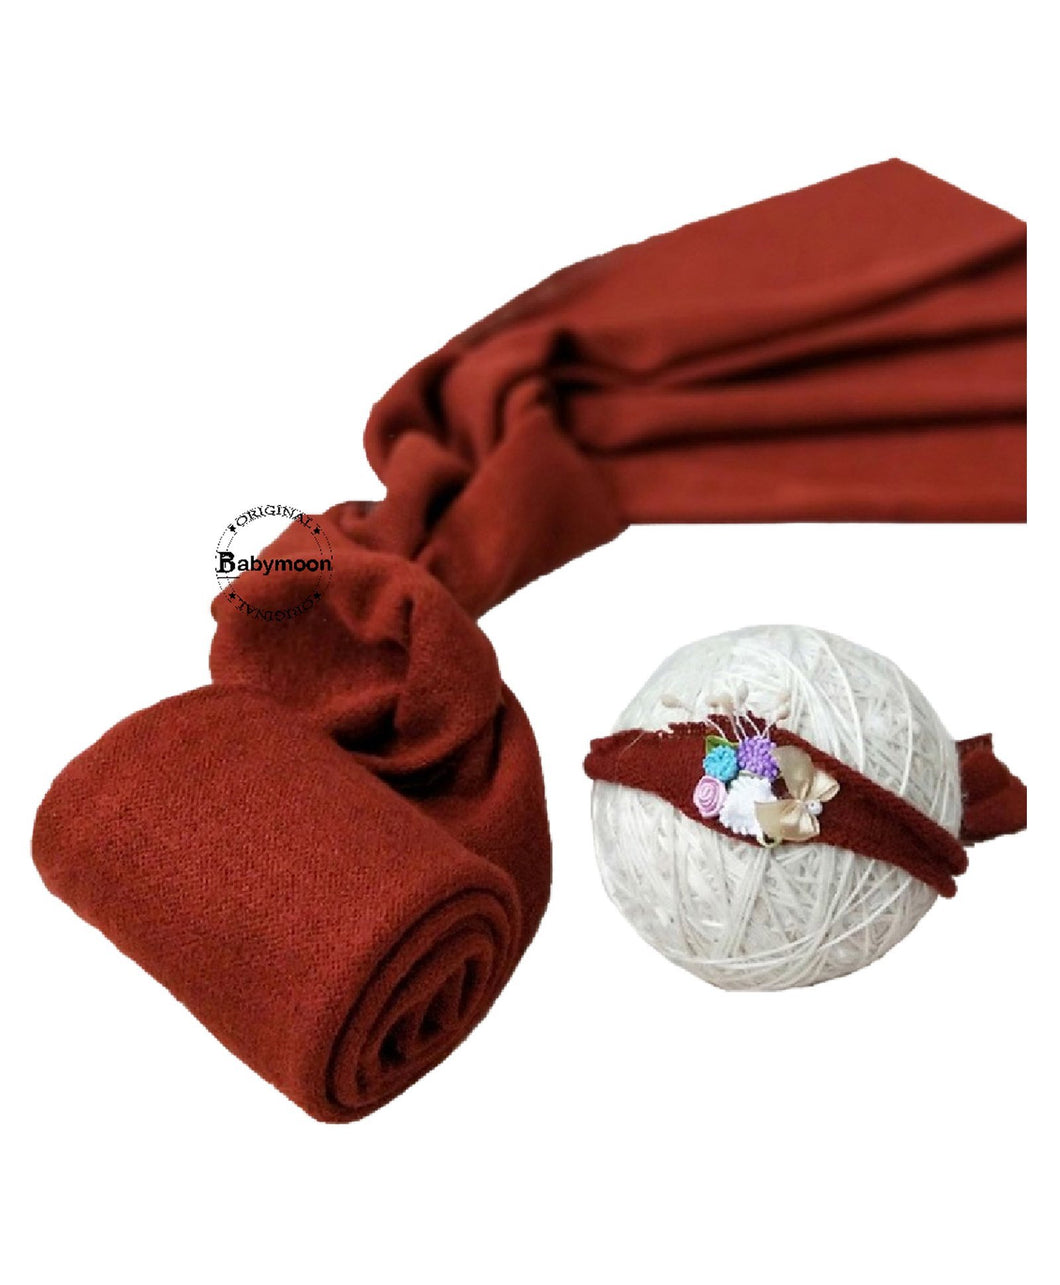 Babymoon Textured Stretchble Baby Photography Shoot Wrap Cloth With Hairband - Maroon